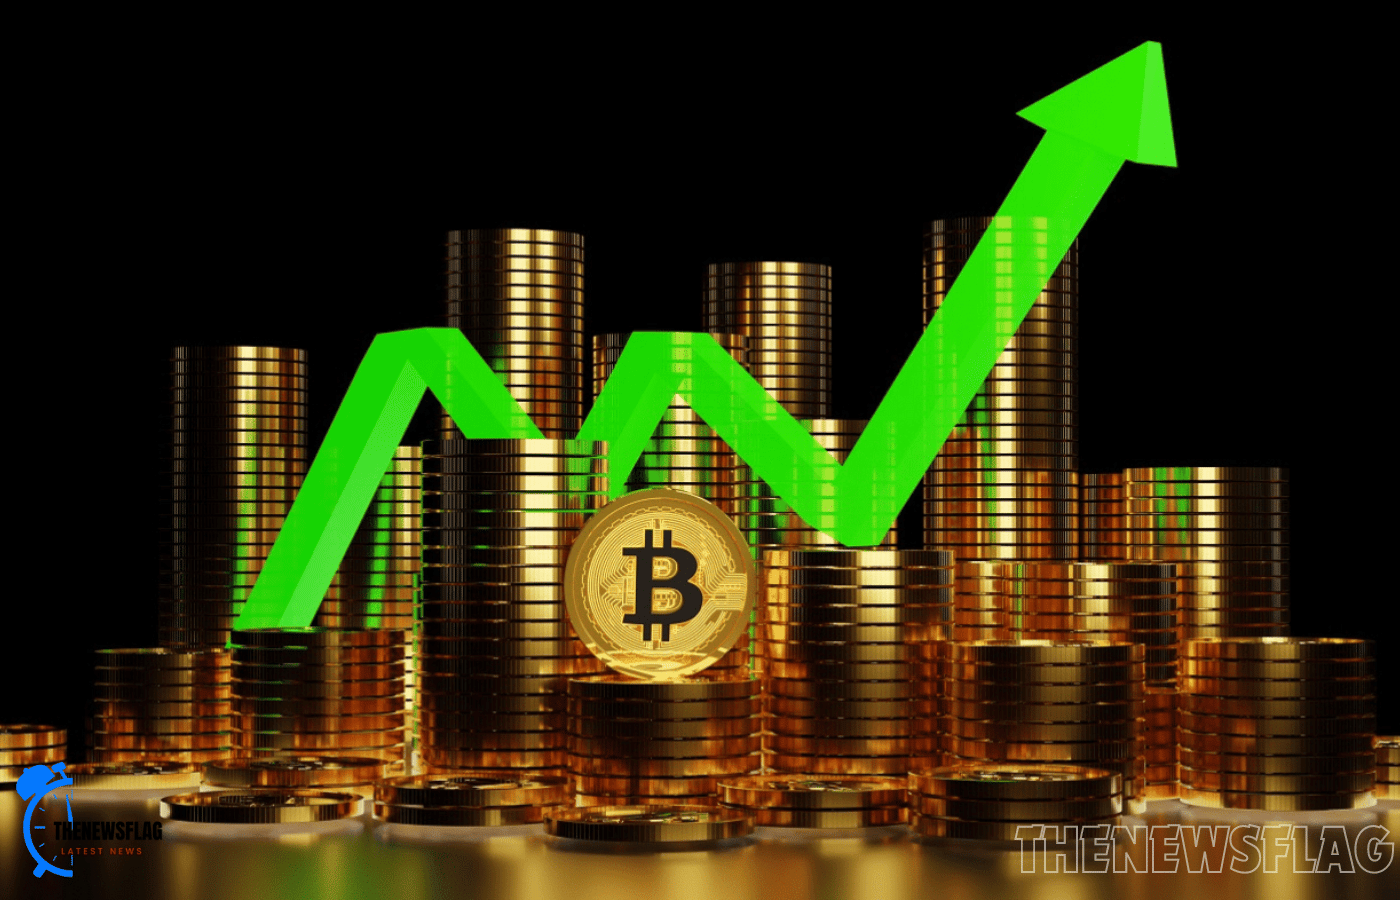 Current Cryptocurrency Prices: Toncoin Gains Almost 25%, While Bitcoin Stays Steady At $72,000